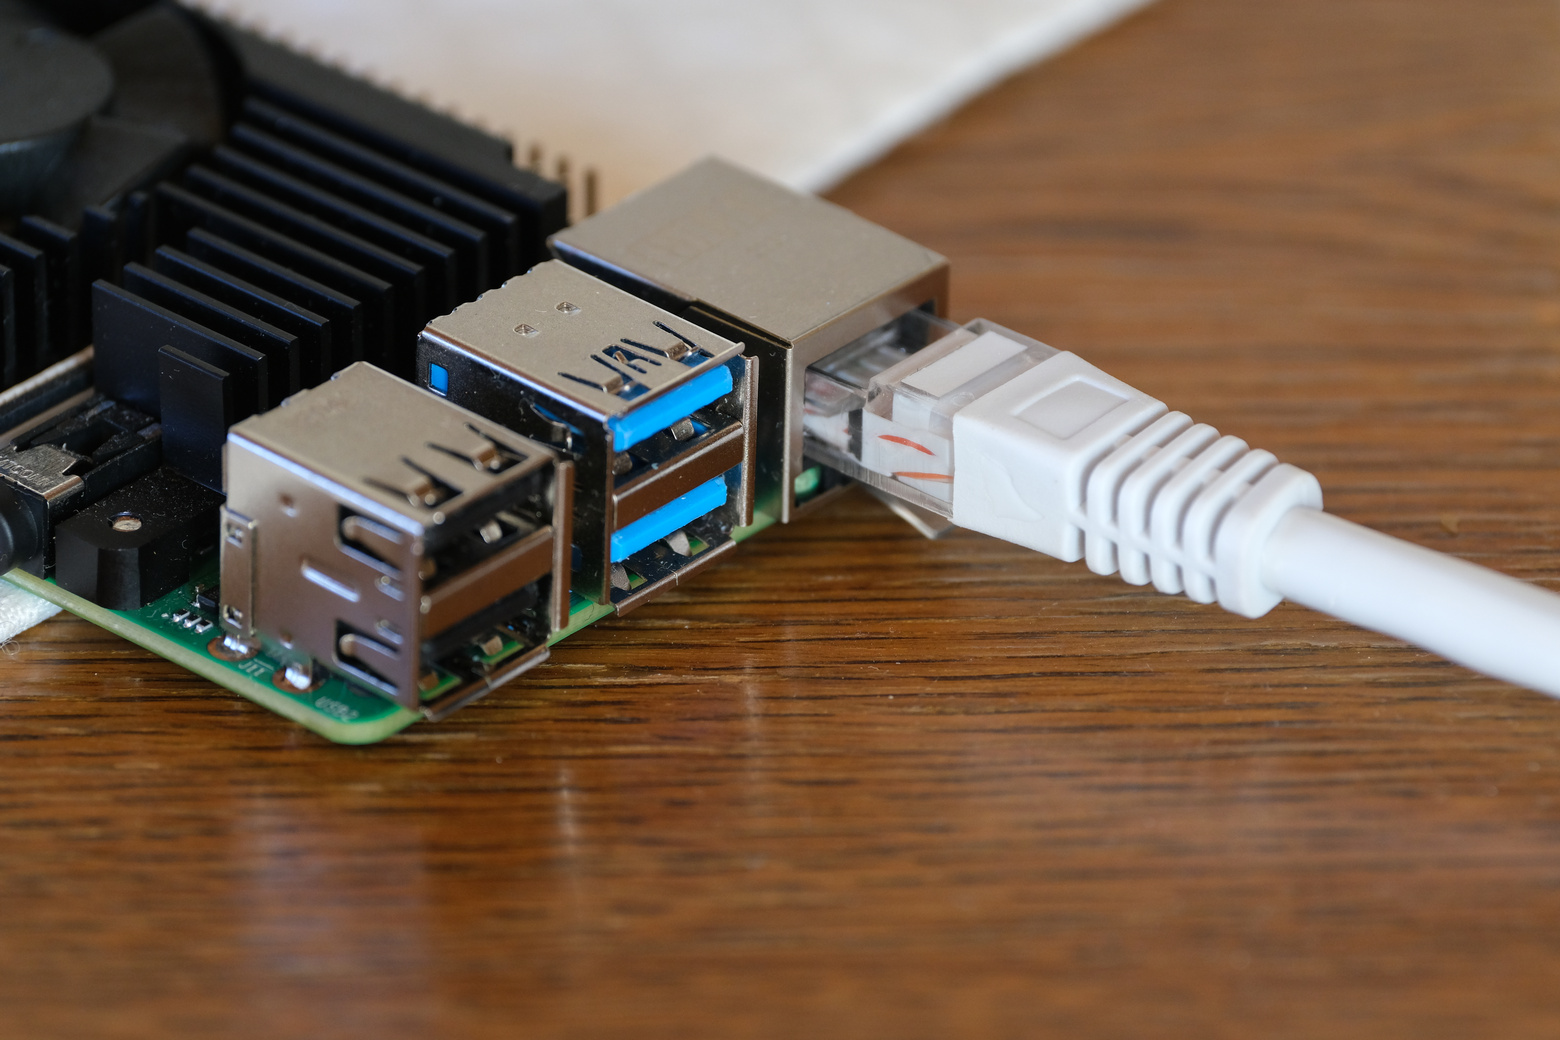 Raspberry Pi with Ethernet cable connected to it.